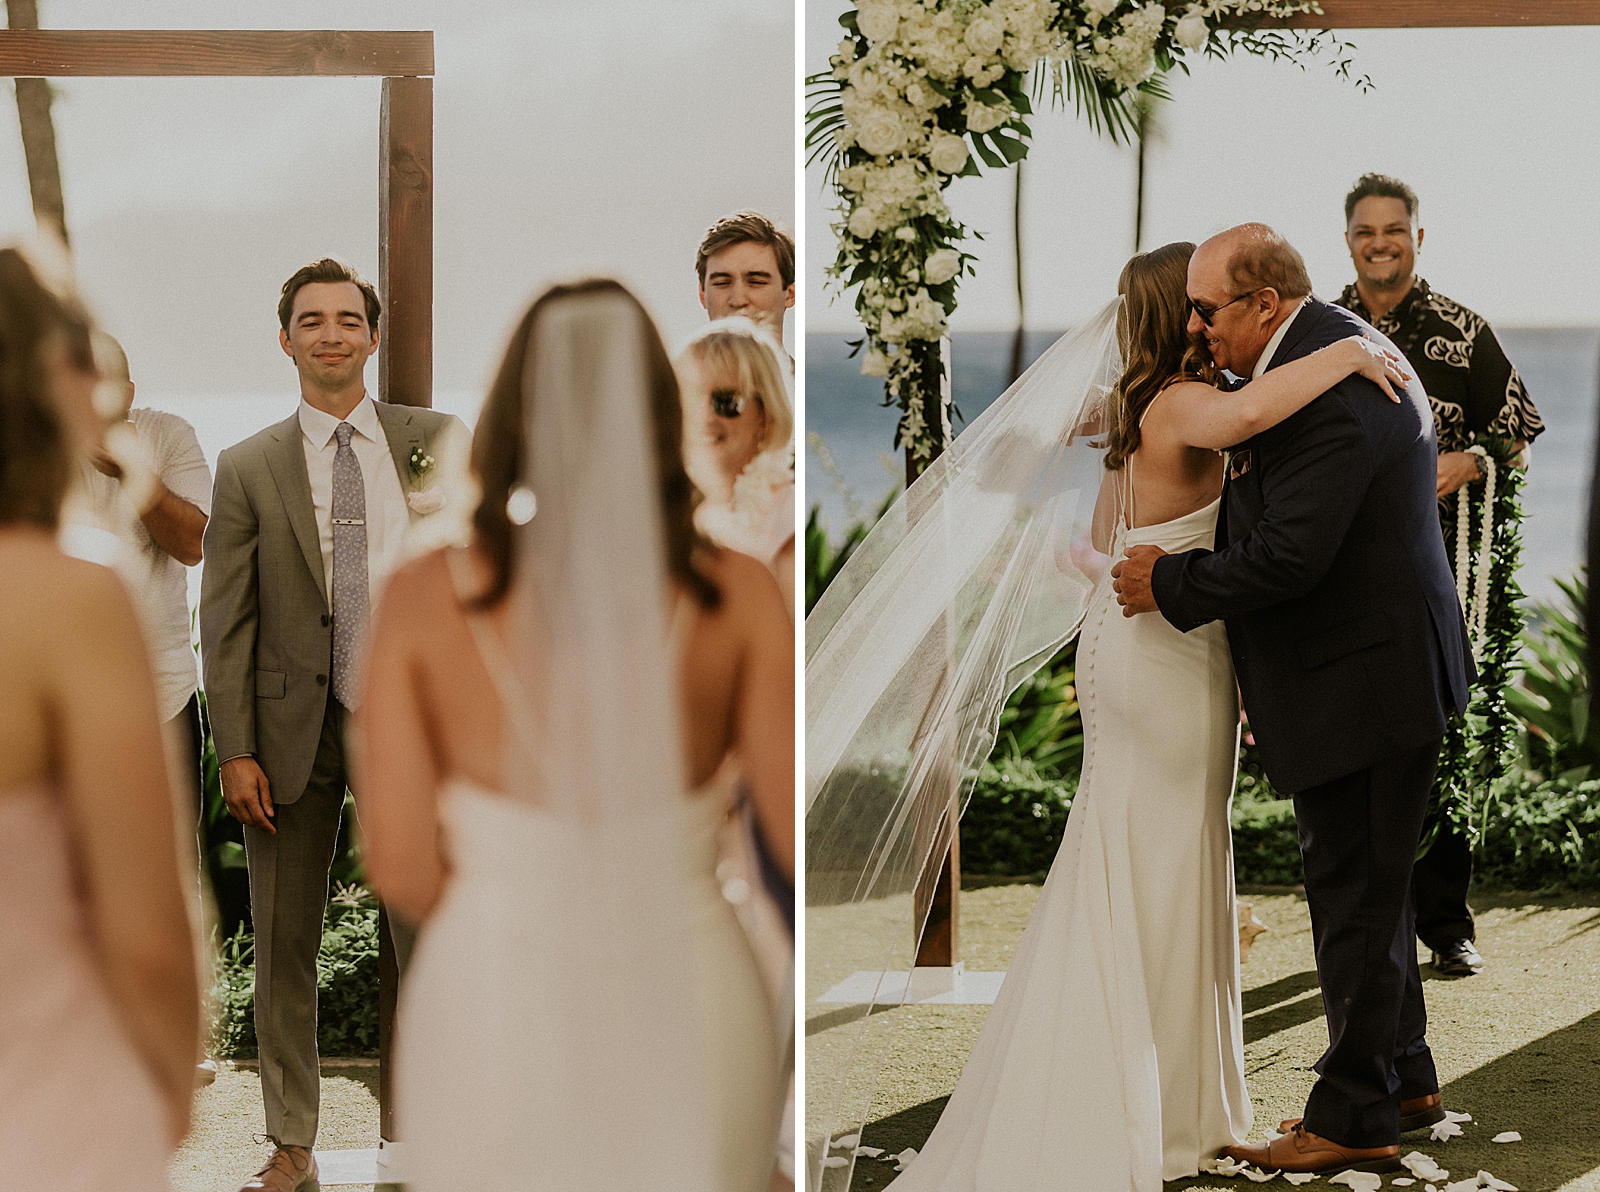 Reaction of Groom seeing Bride walking up the aisle and Bride hugging Father at the alter for outdoor Ceremony